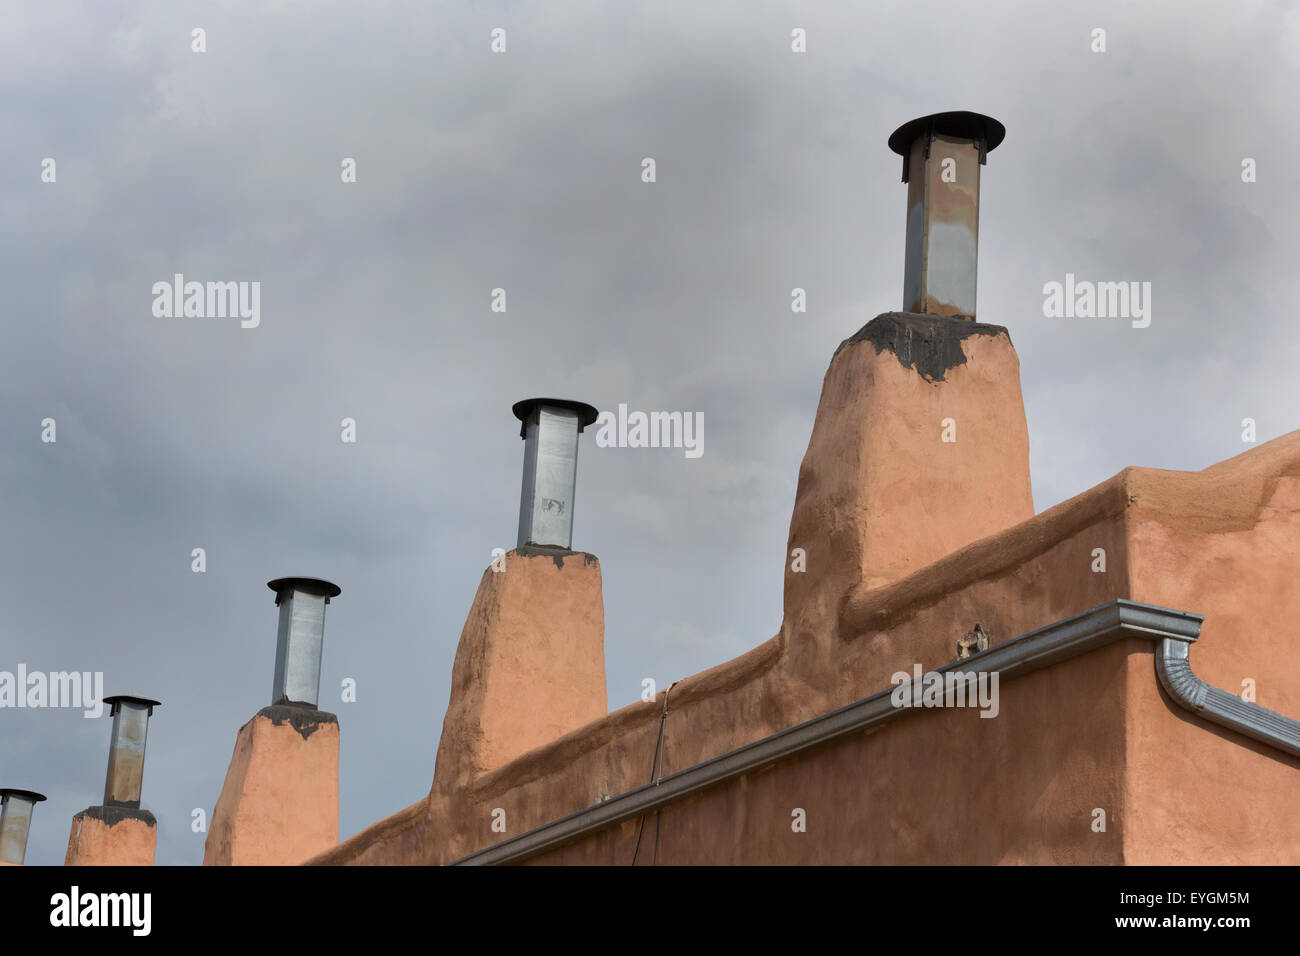 Row of chimneys on adobe building in Old Town district of Albuquerque, New Mexico.  Copy space in sky above architectural detail Stock Photo